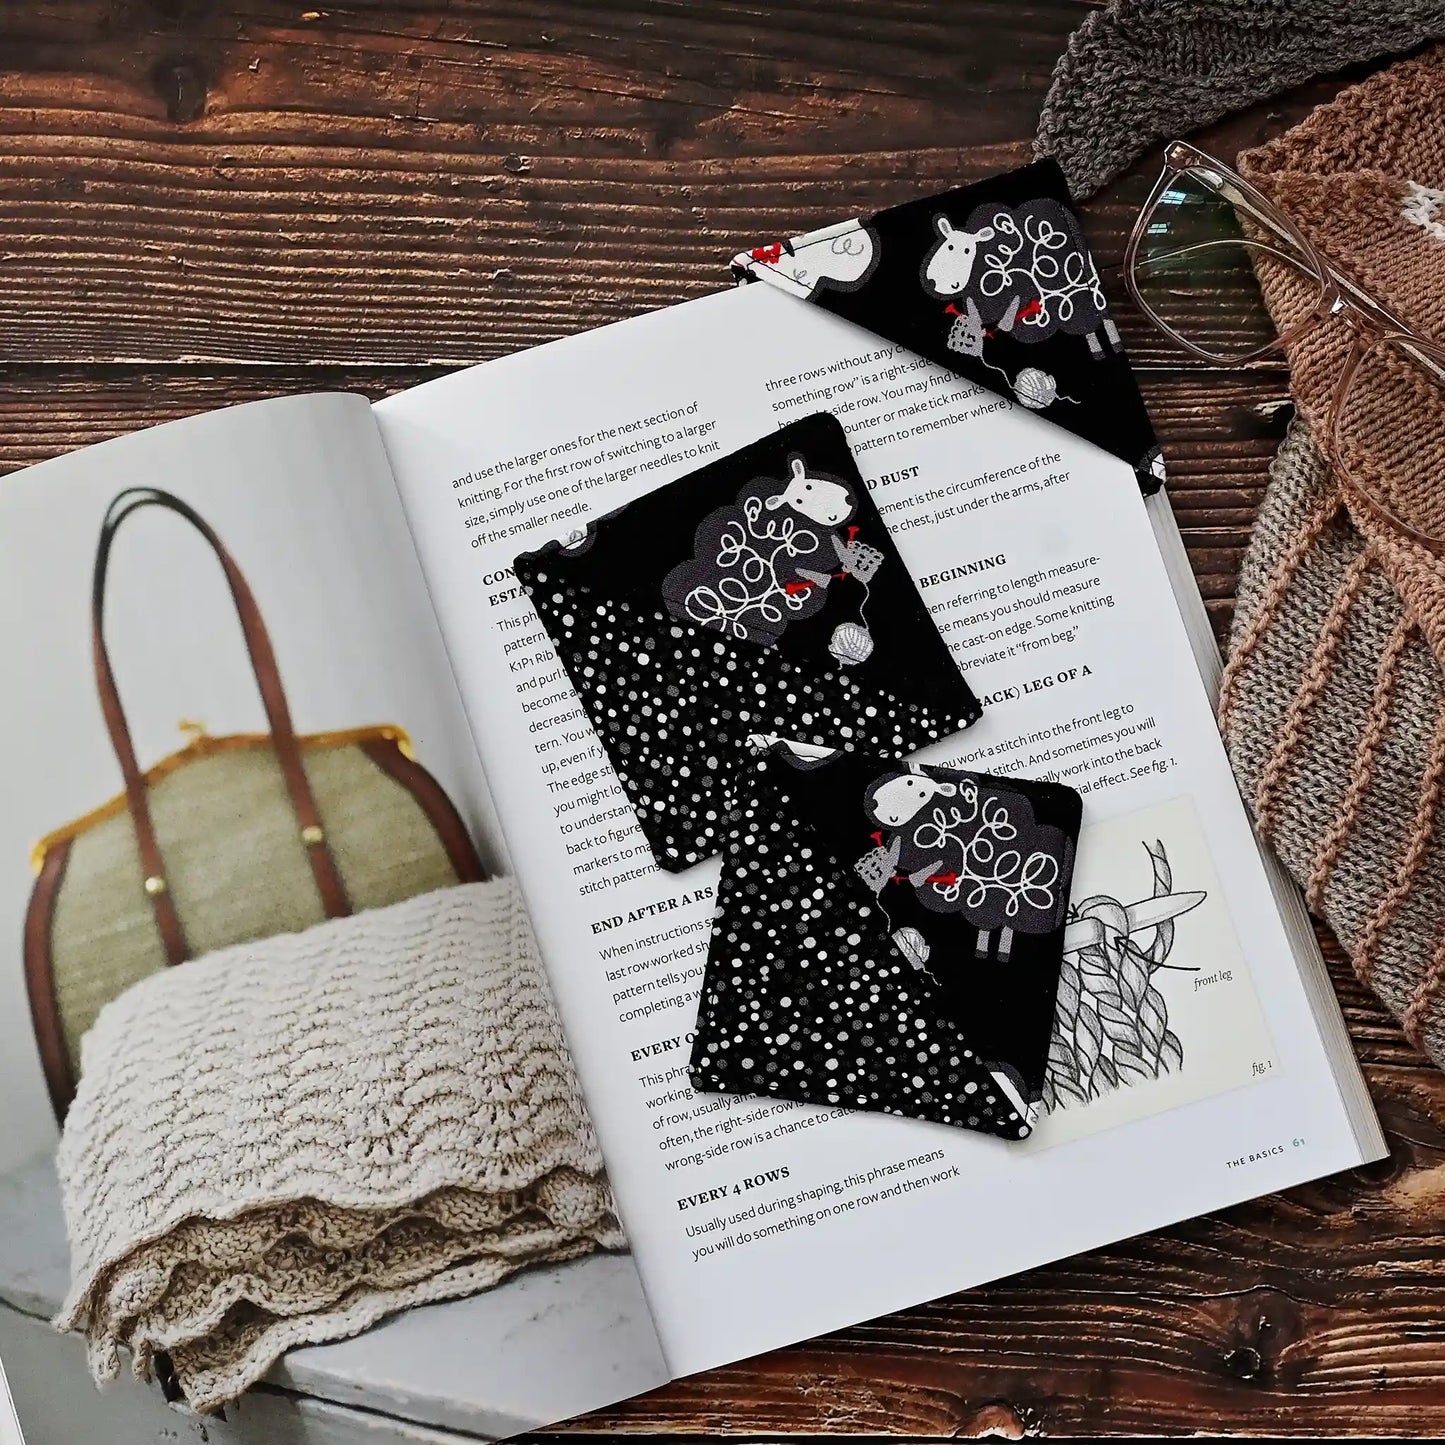 Adorable knitting sheep bookmarks featuring various sheep on a black spotted background.  Great gift for knitters!  Made in Canada by Yellow Petal Handmade.